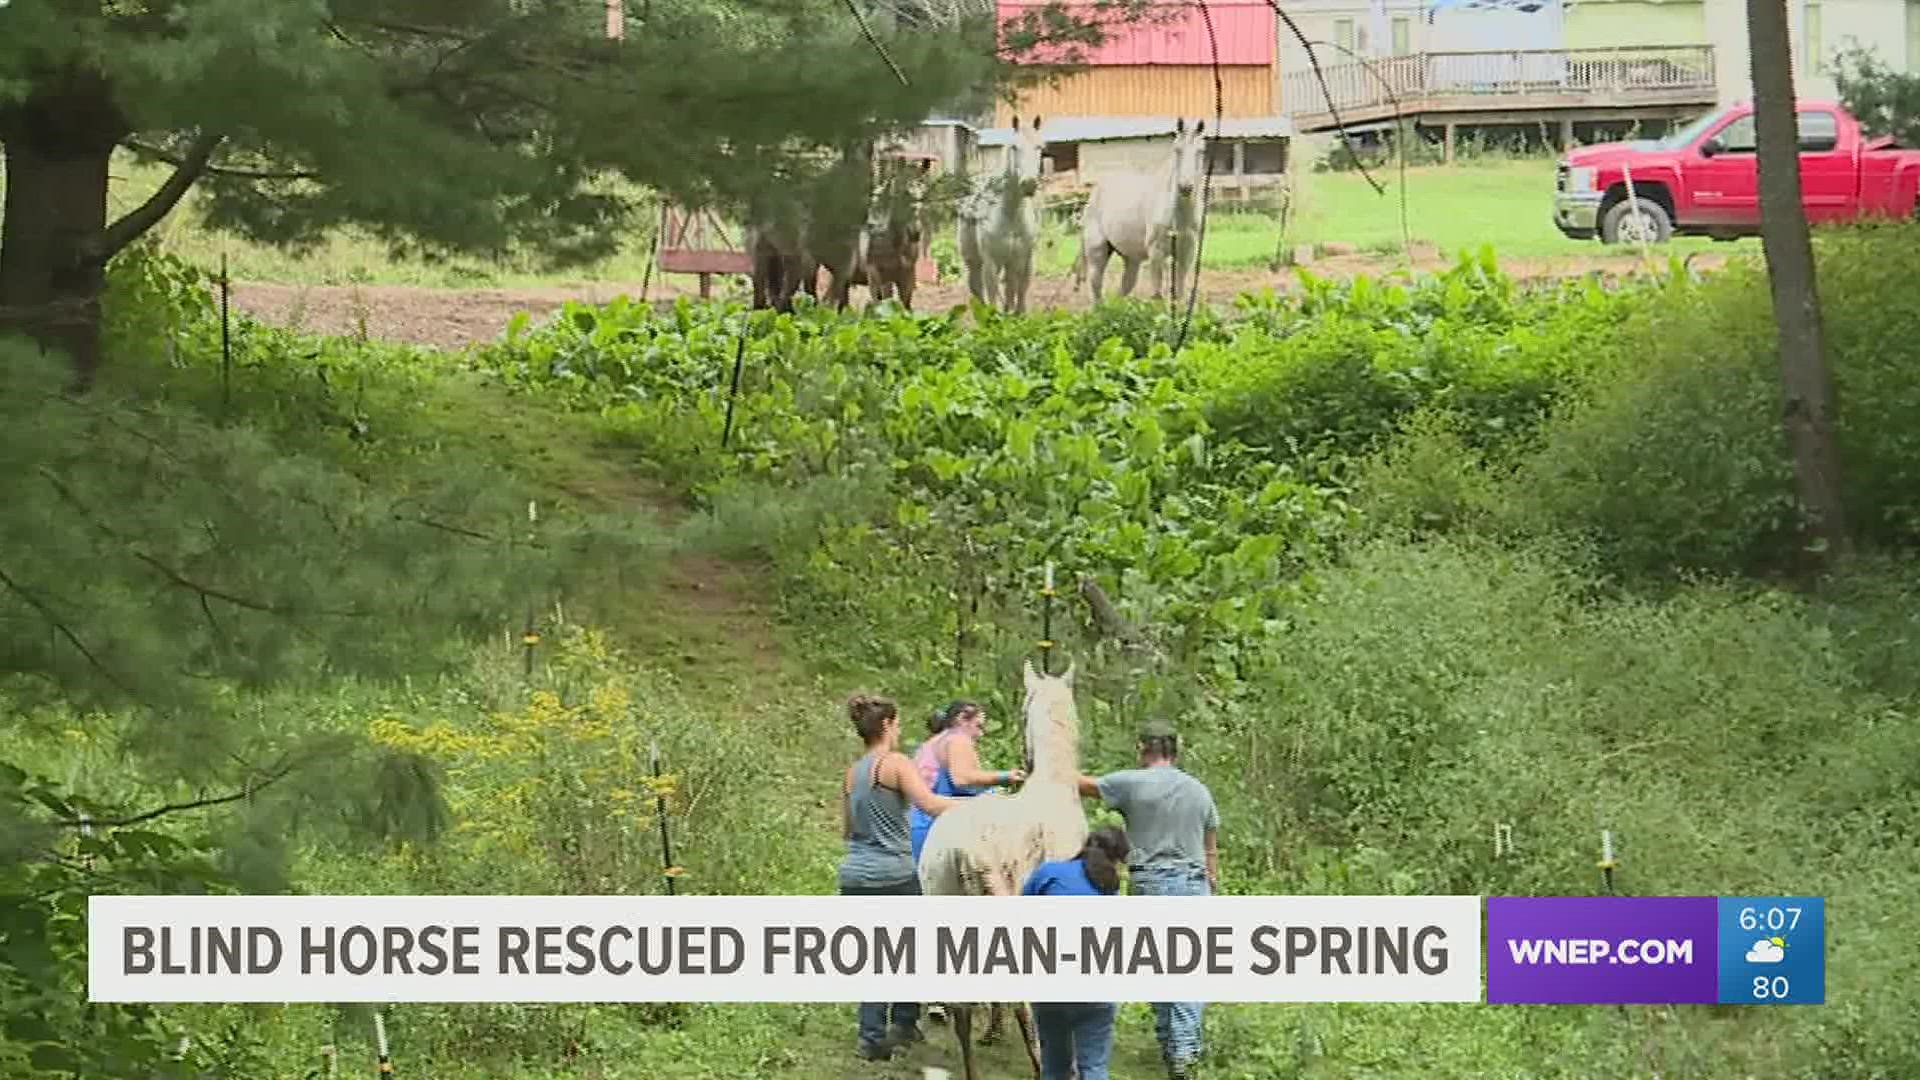 Specs, a 23-year-old blind horse, fell into a man-made spring on his owner's farmland during the early morning hours on Monday.